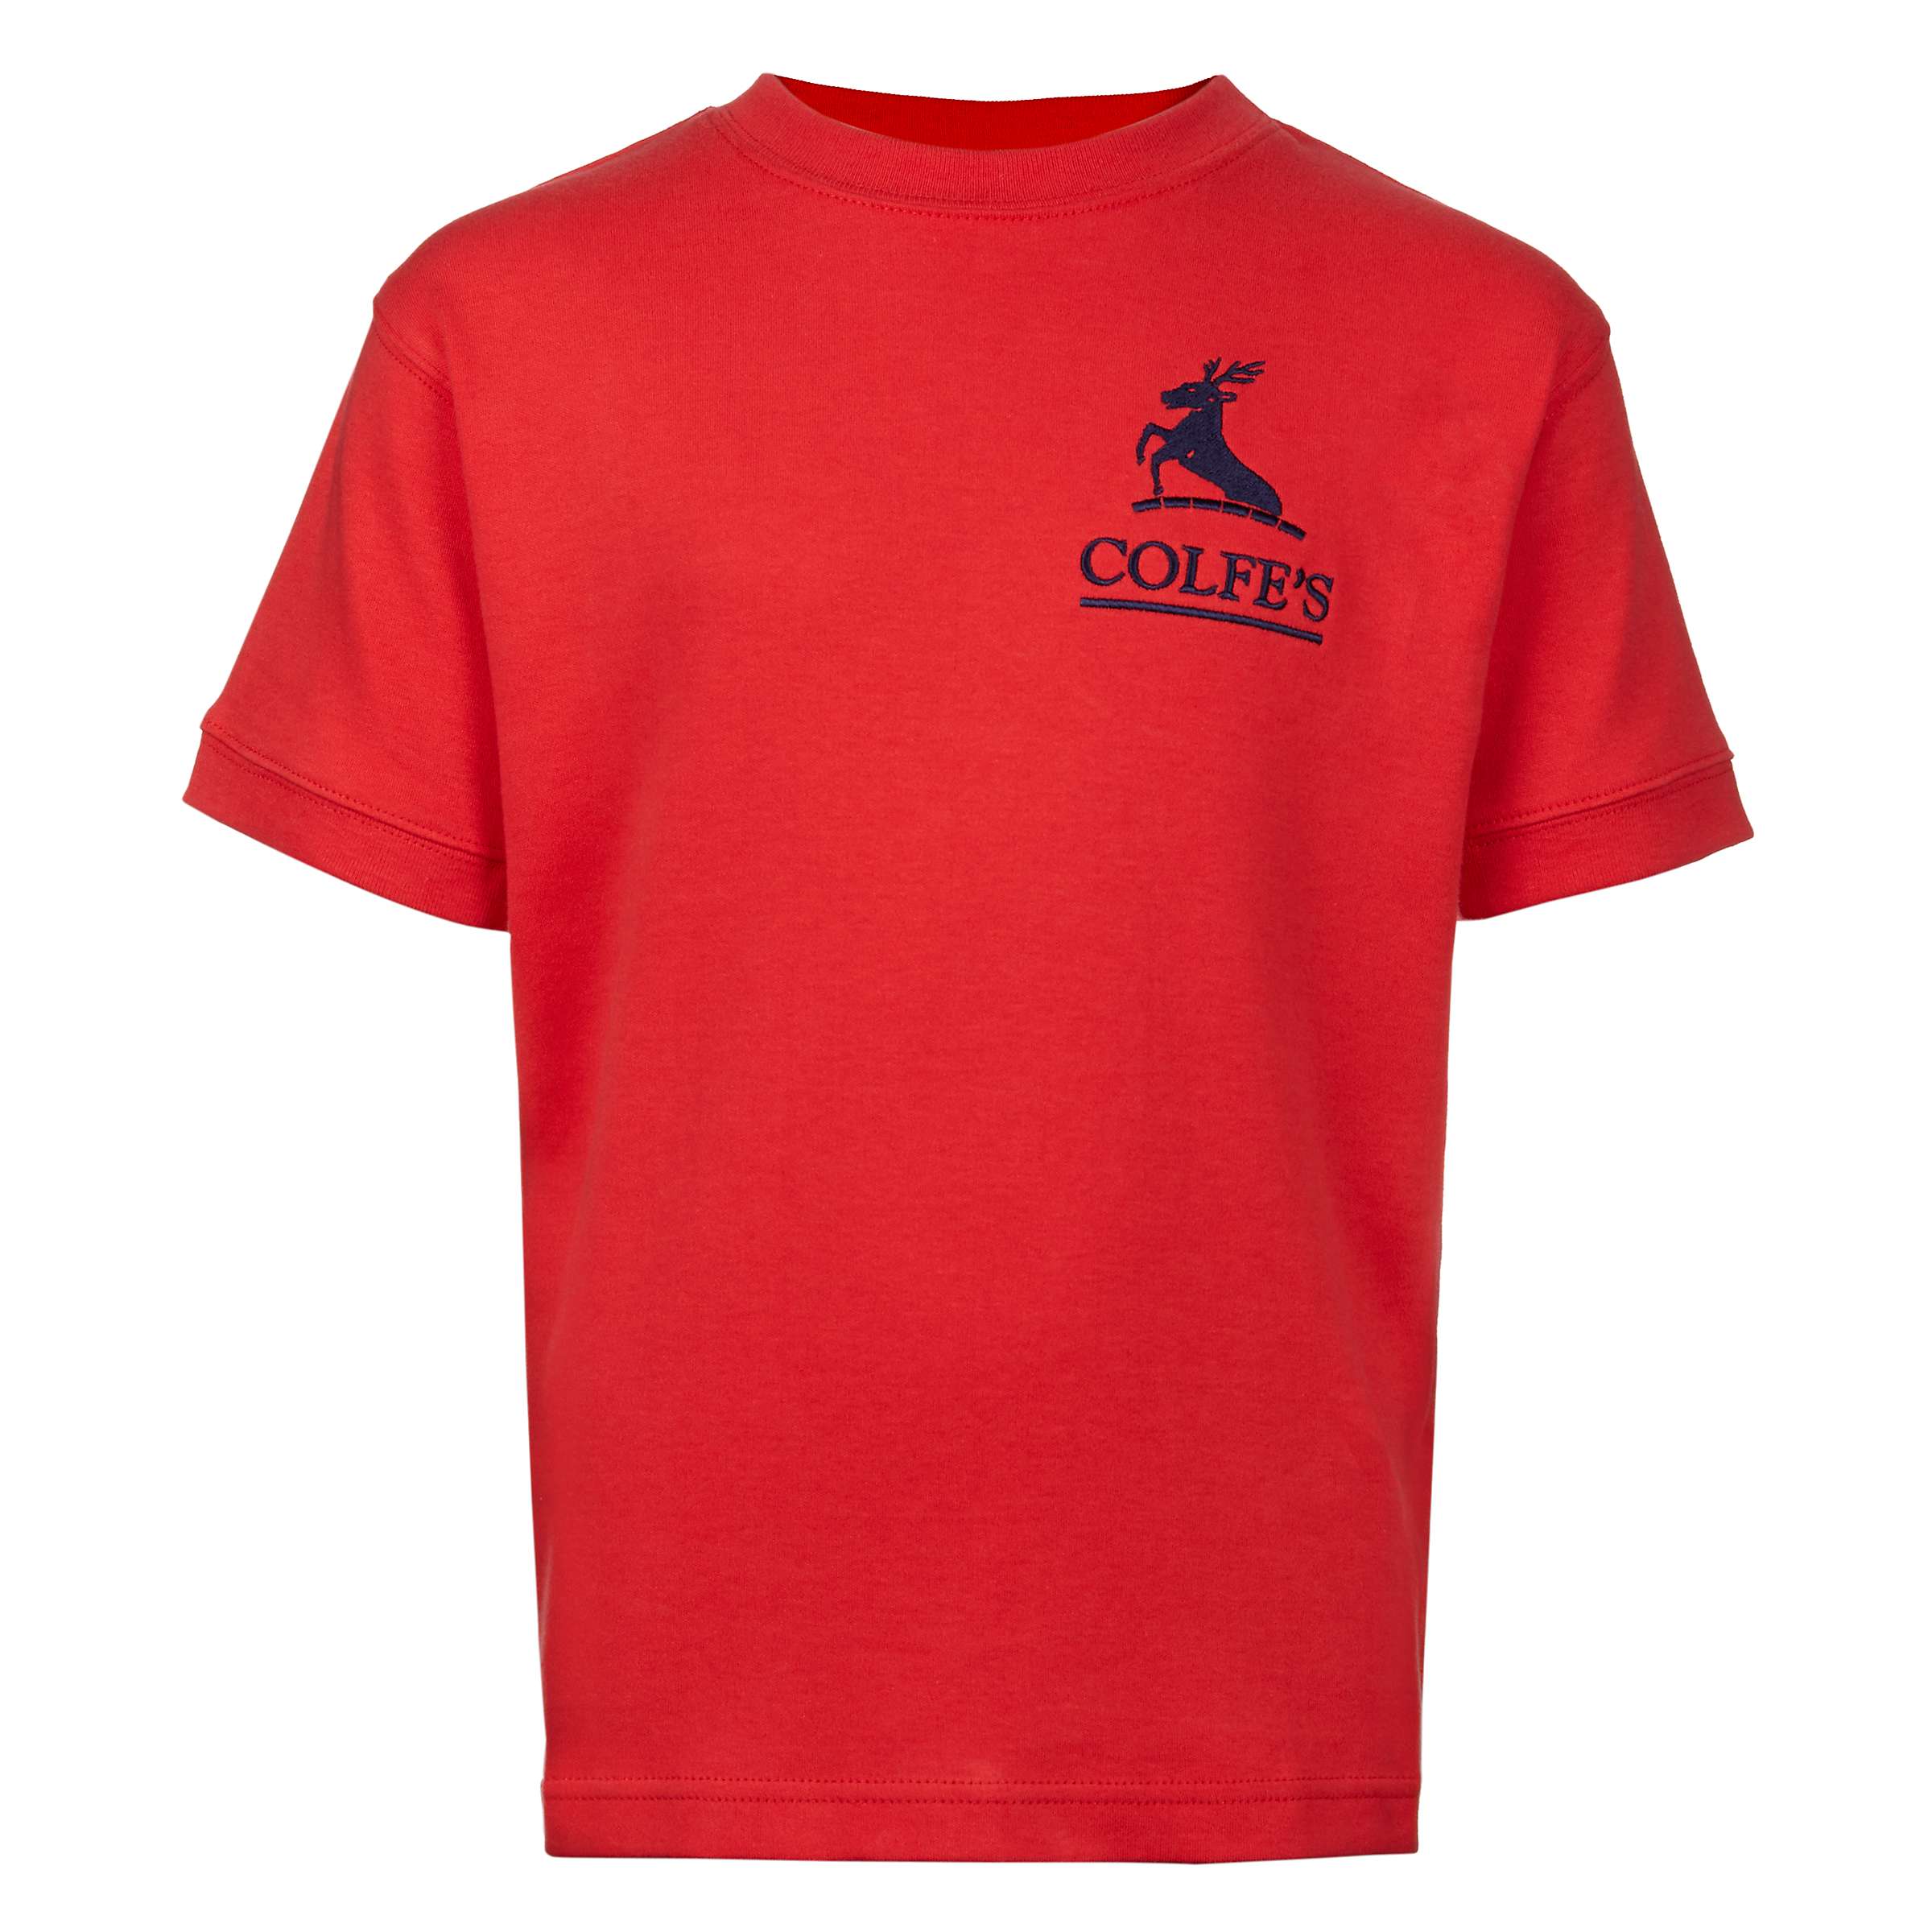 Buy Colfe's School Aquila House T-Shirt, Red Online at johnlewis.com